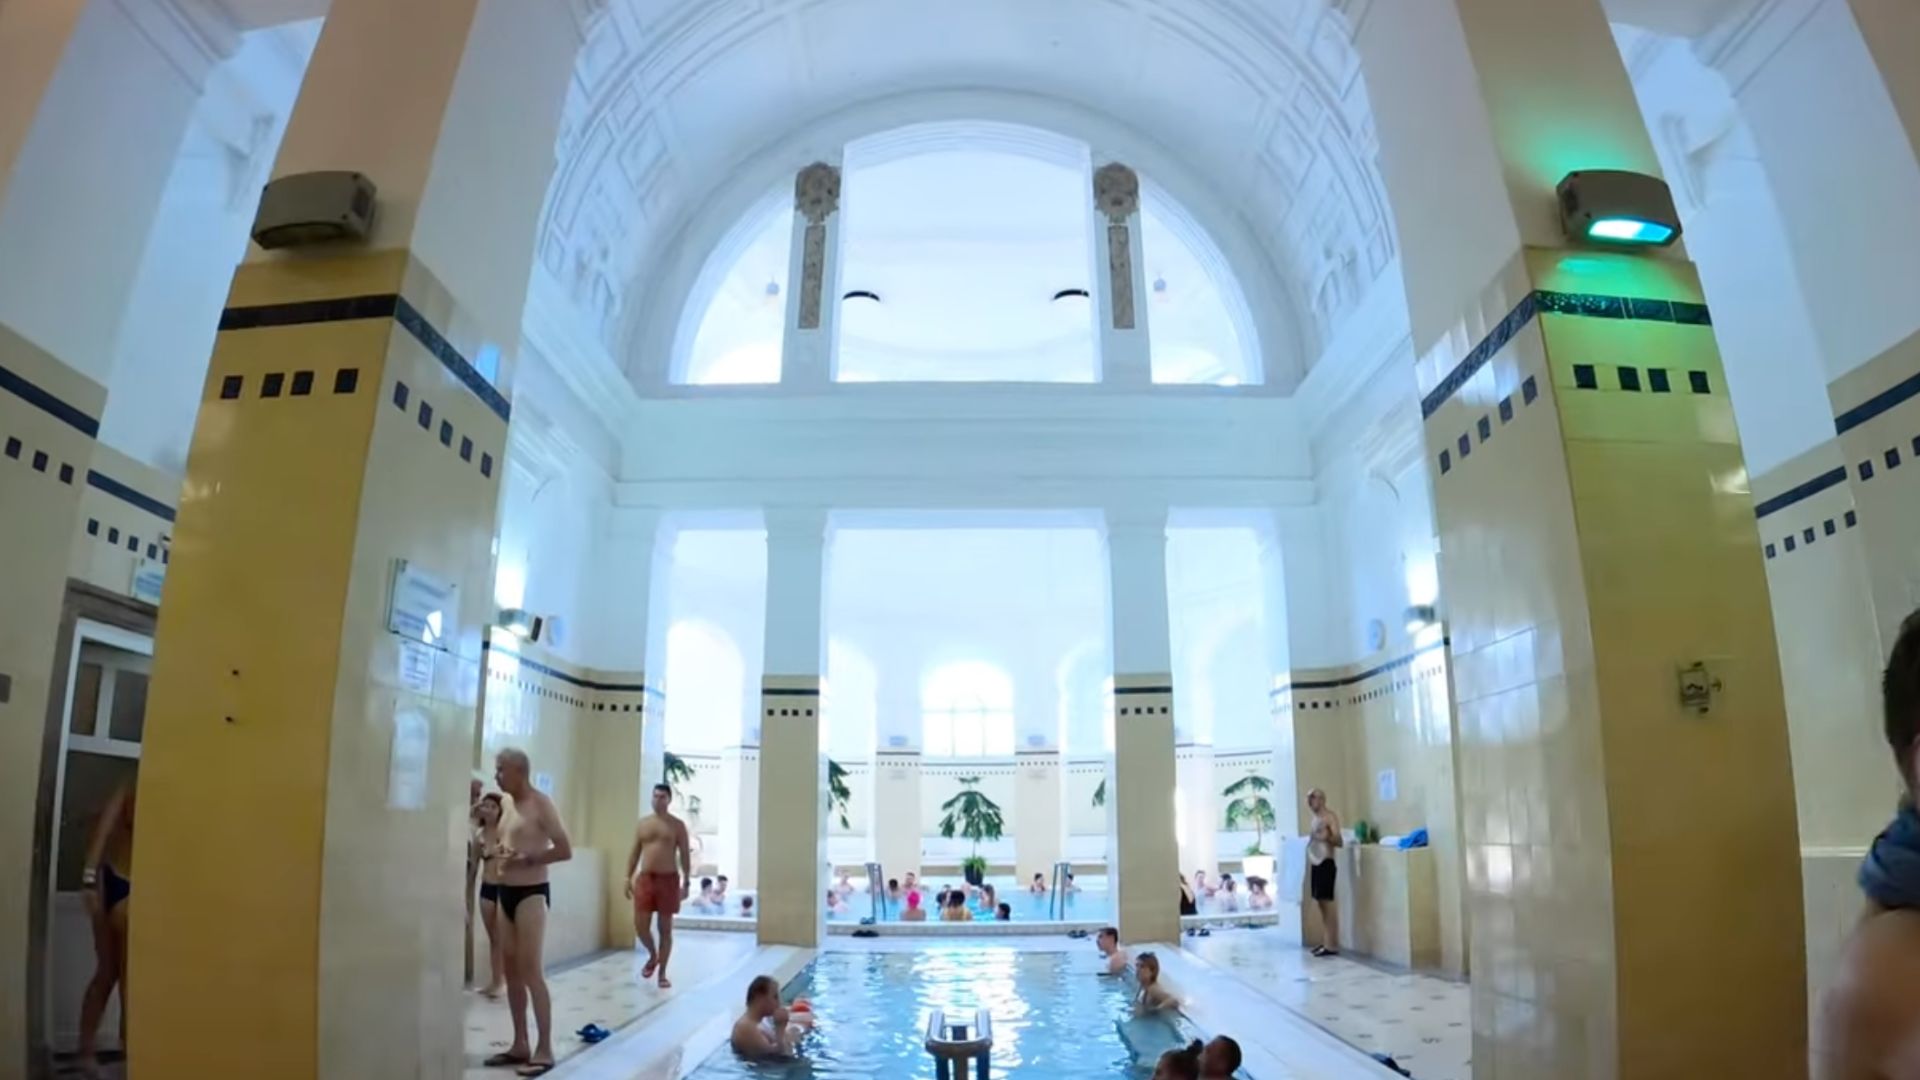 Indoor pool area with high ceiling and white columns at Széchenyi Thermal Bath in Budapest